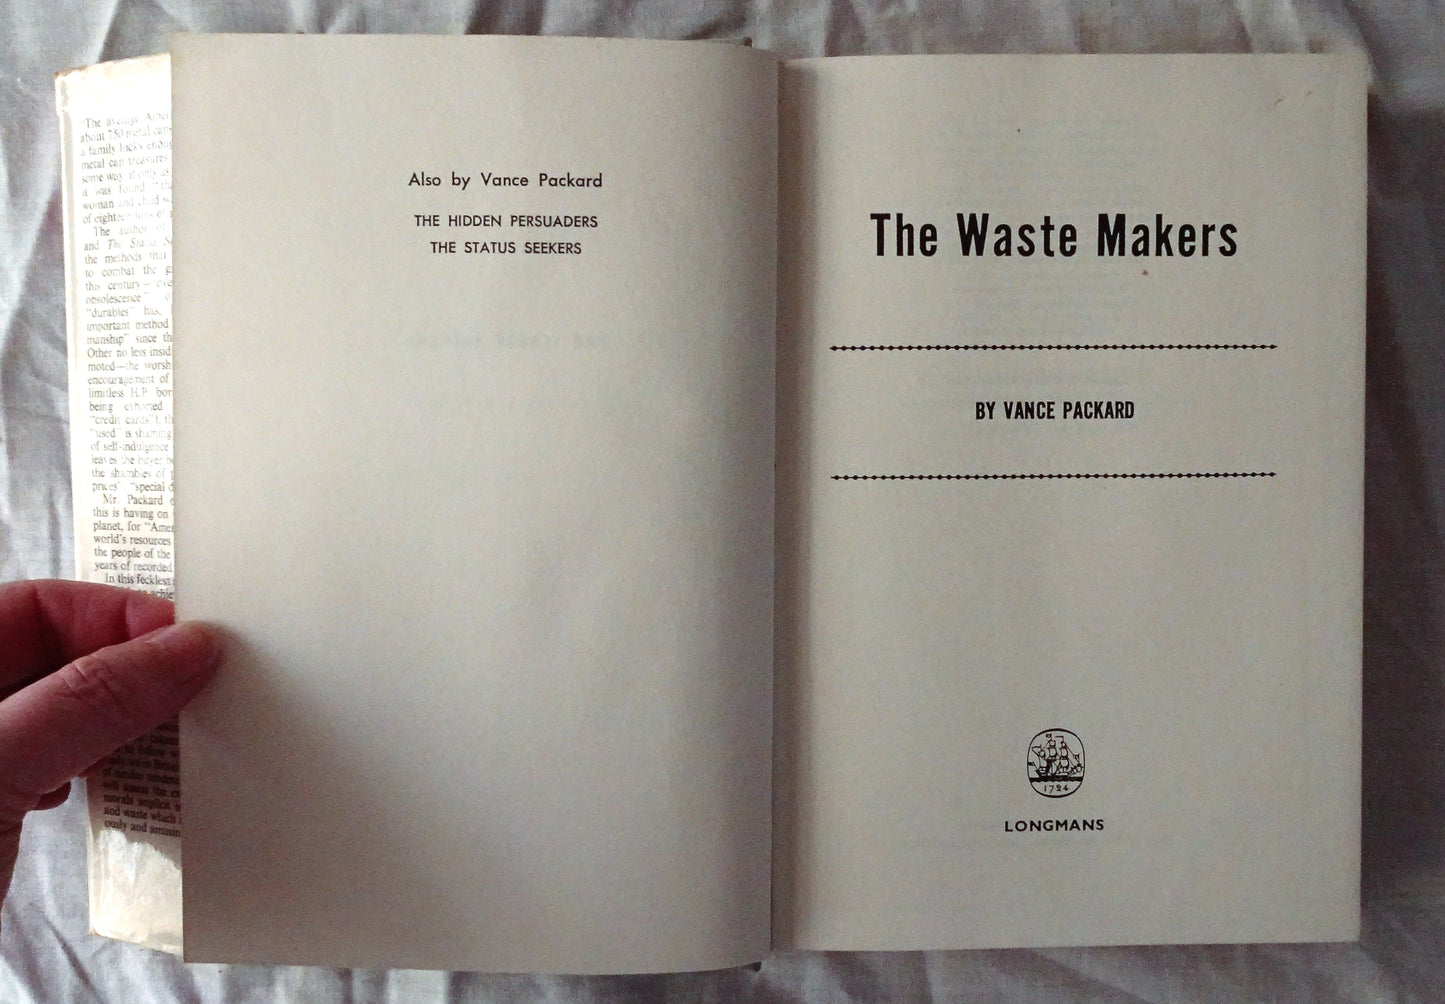 The Waste Makers by Vance Packard